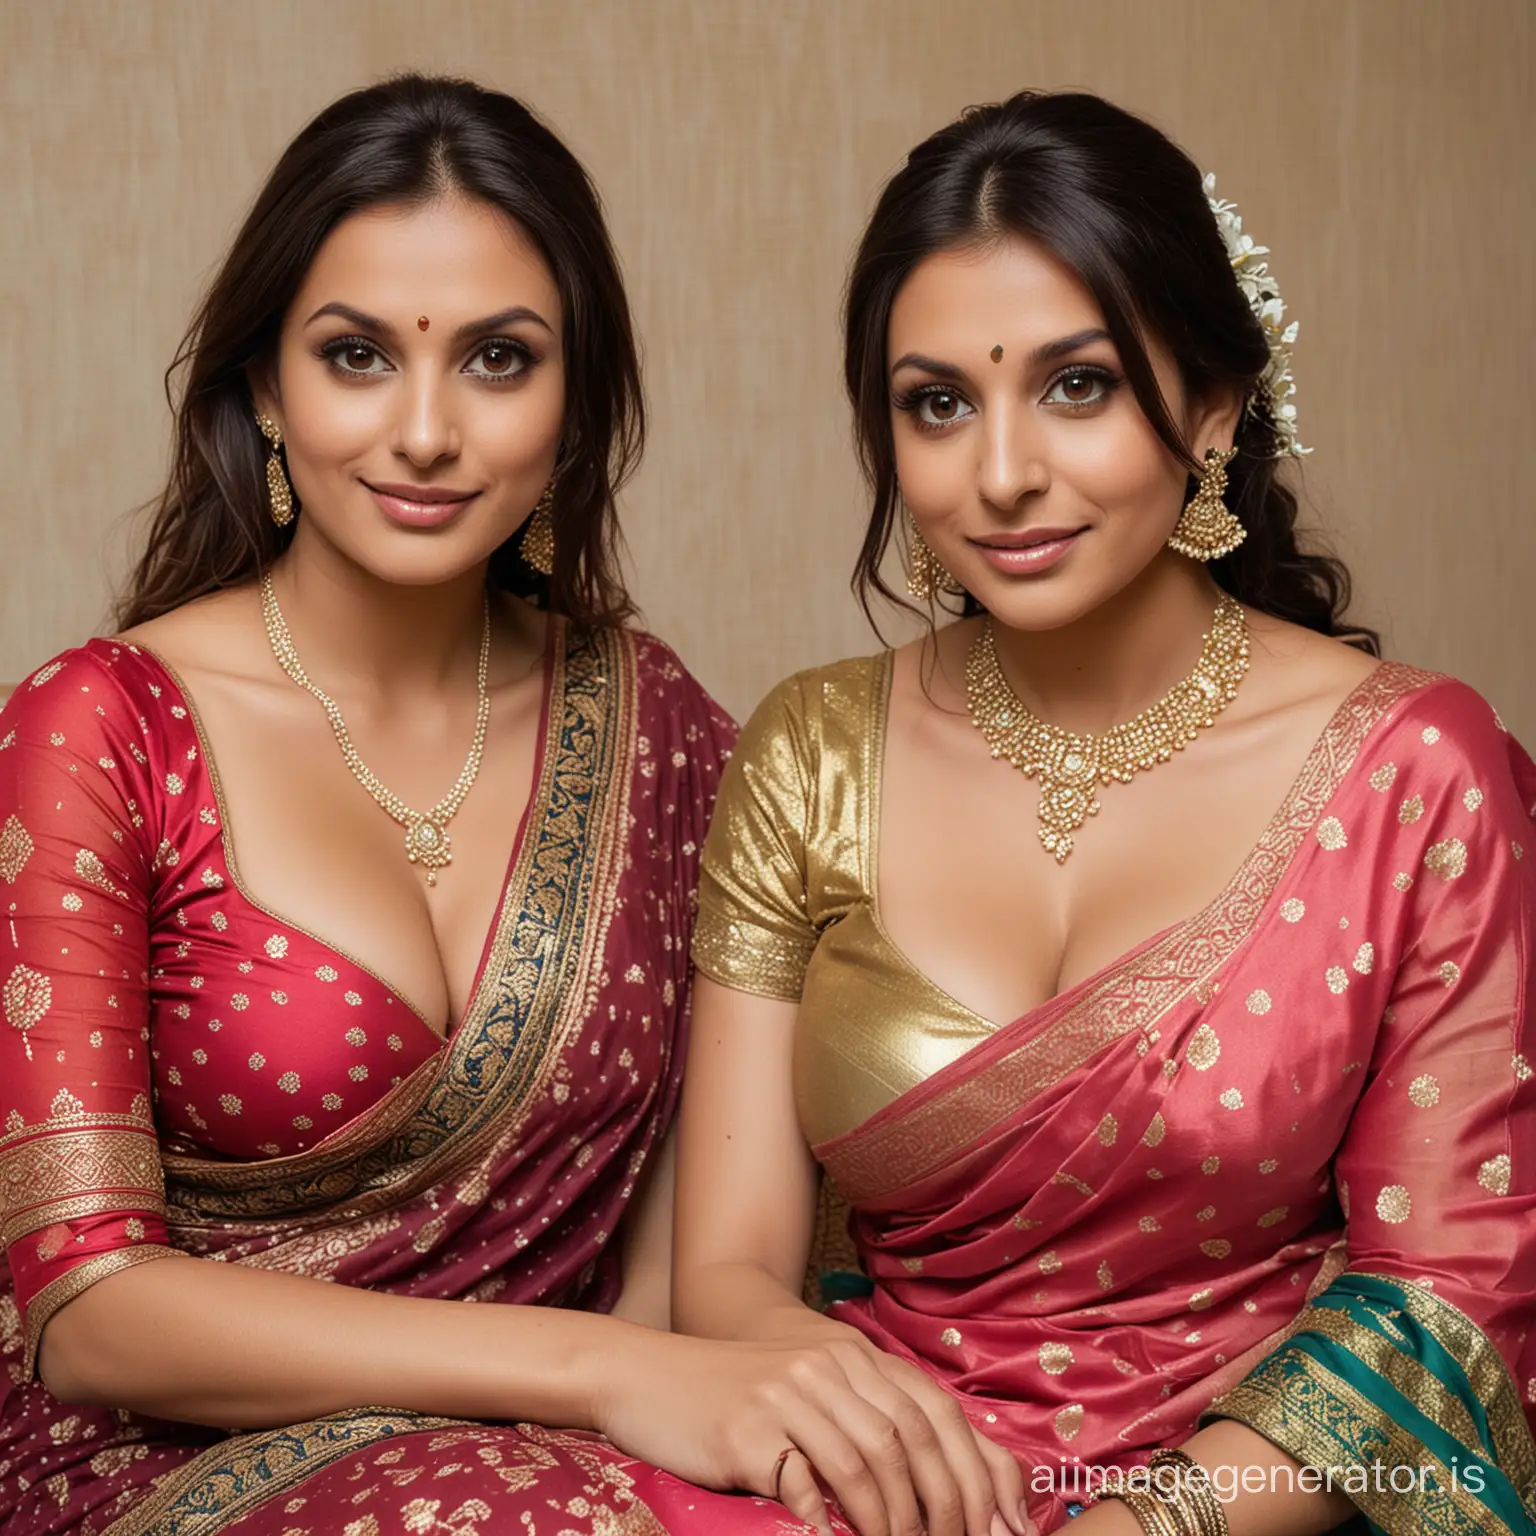 European-Brunettes-in-Deep-Cleavage-Sarees-at-Indian-Wedding